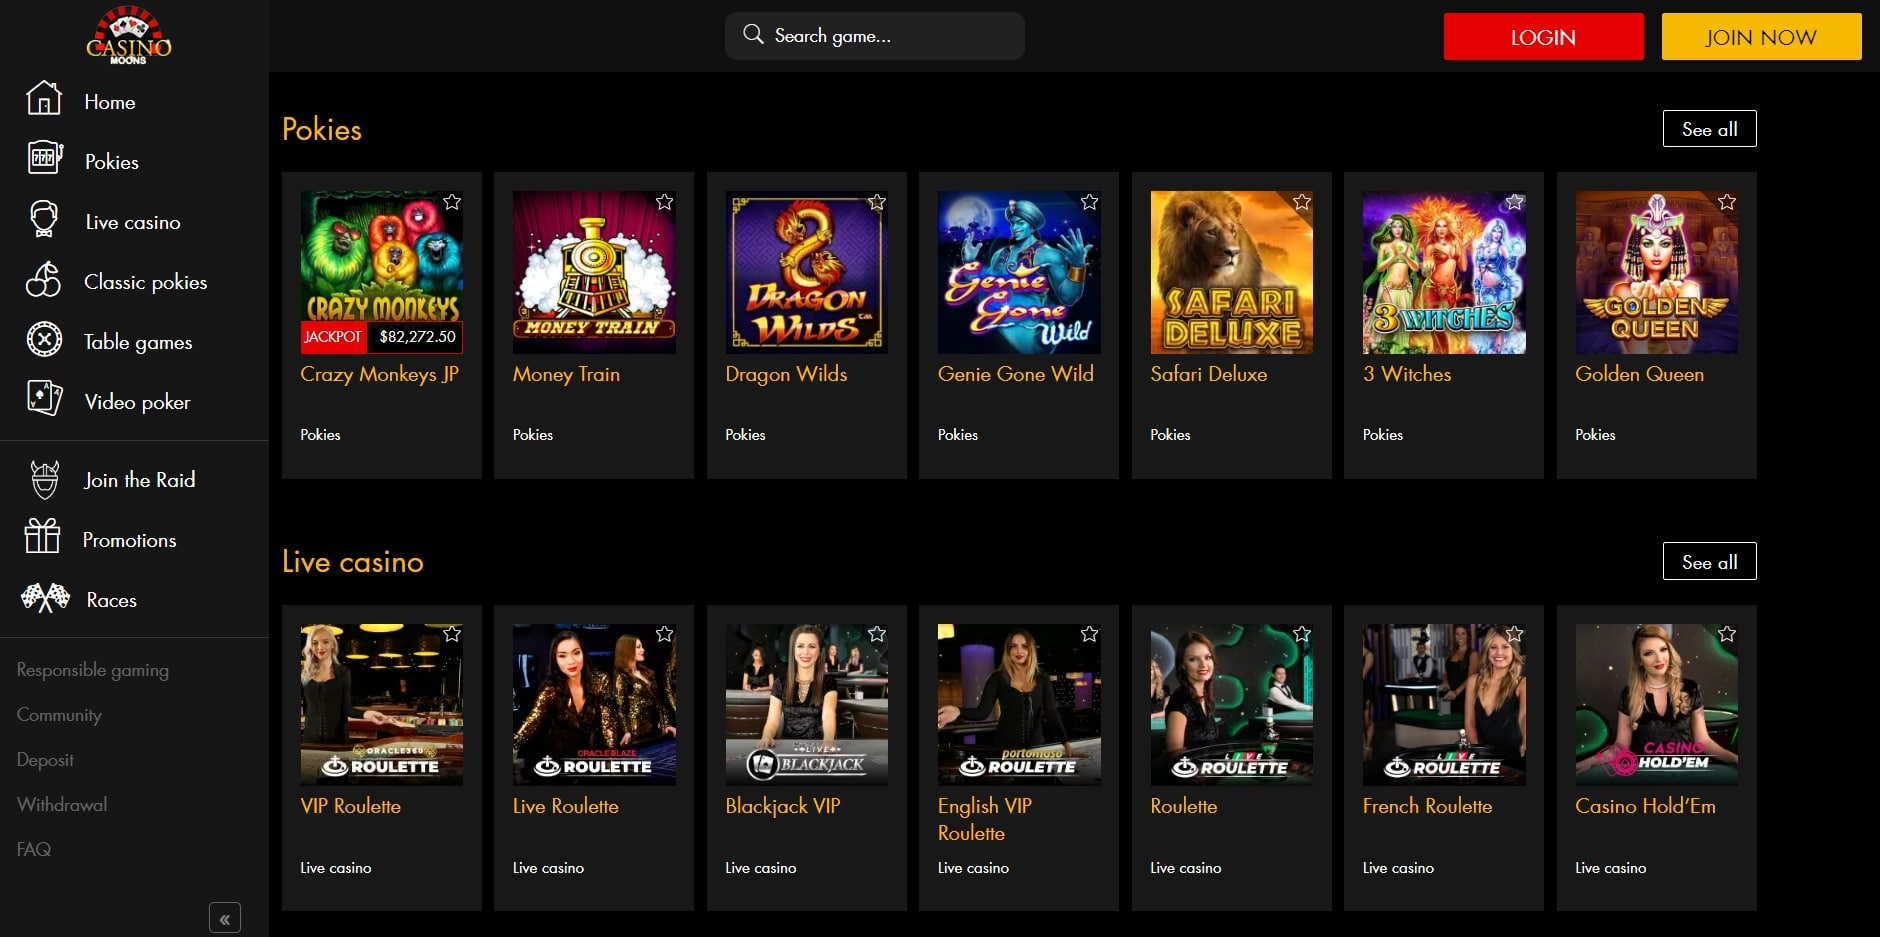 Casino Moons - Play the Best Online Casino Games Moons Casino